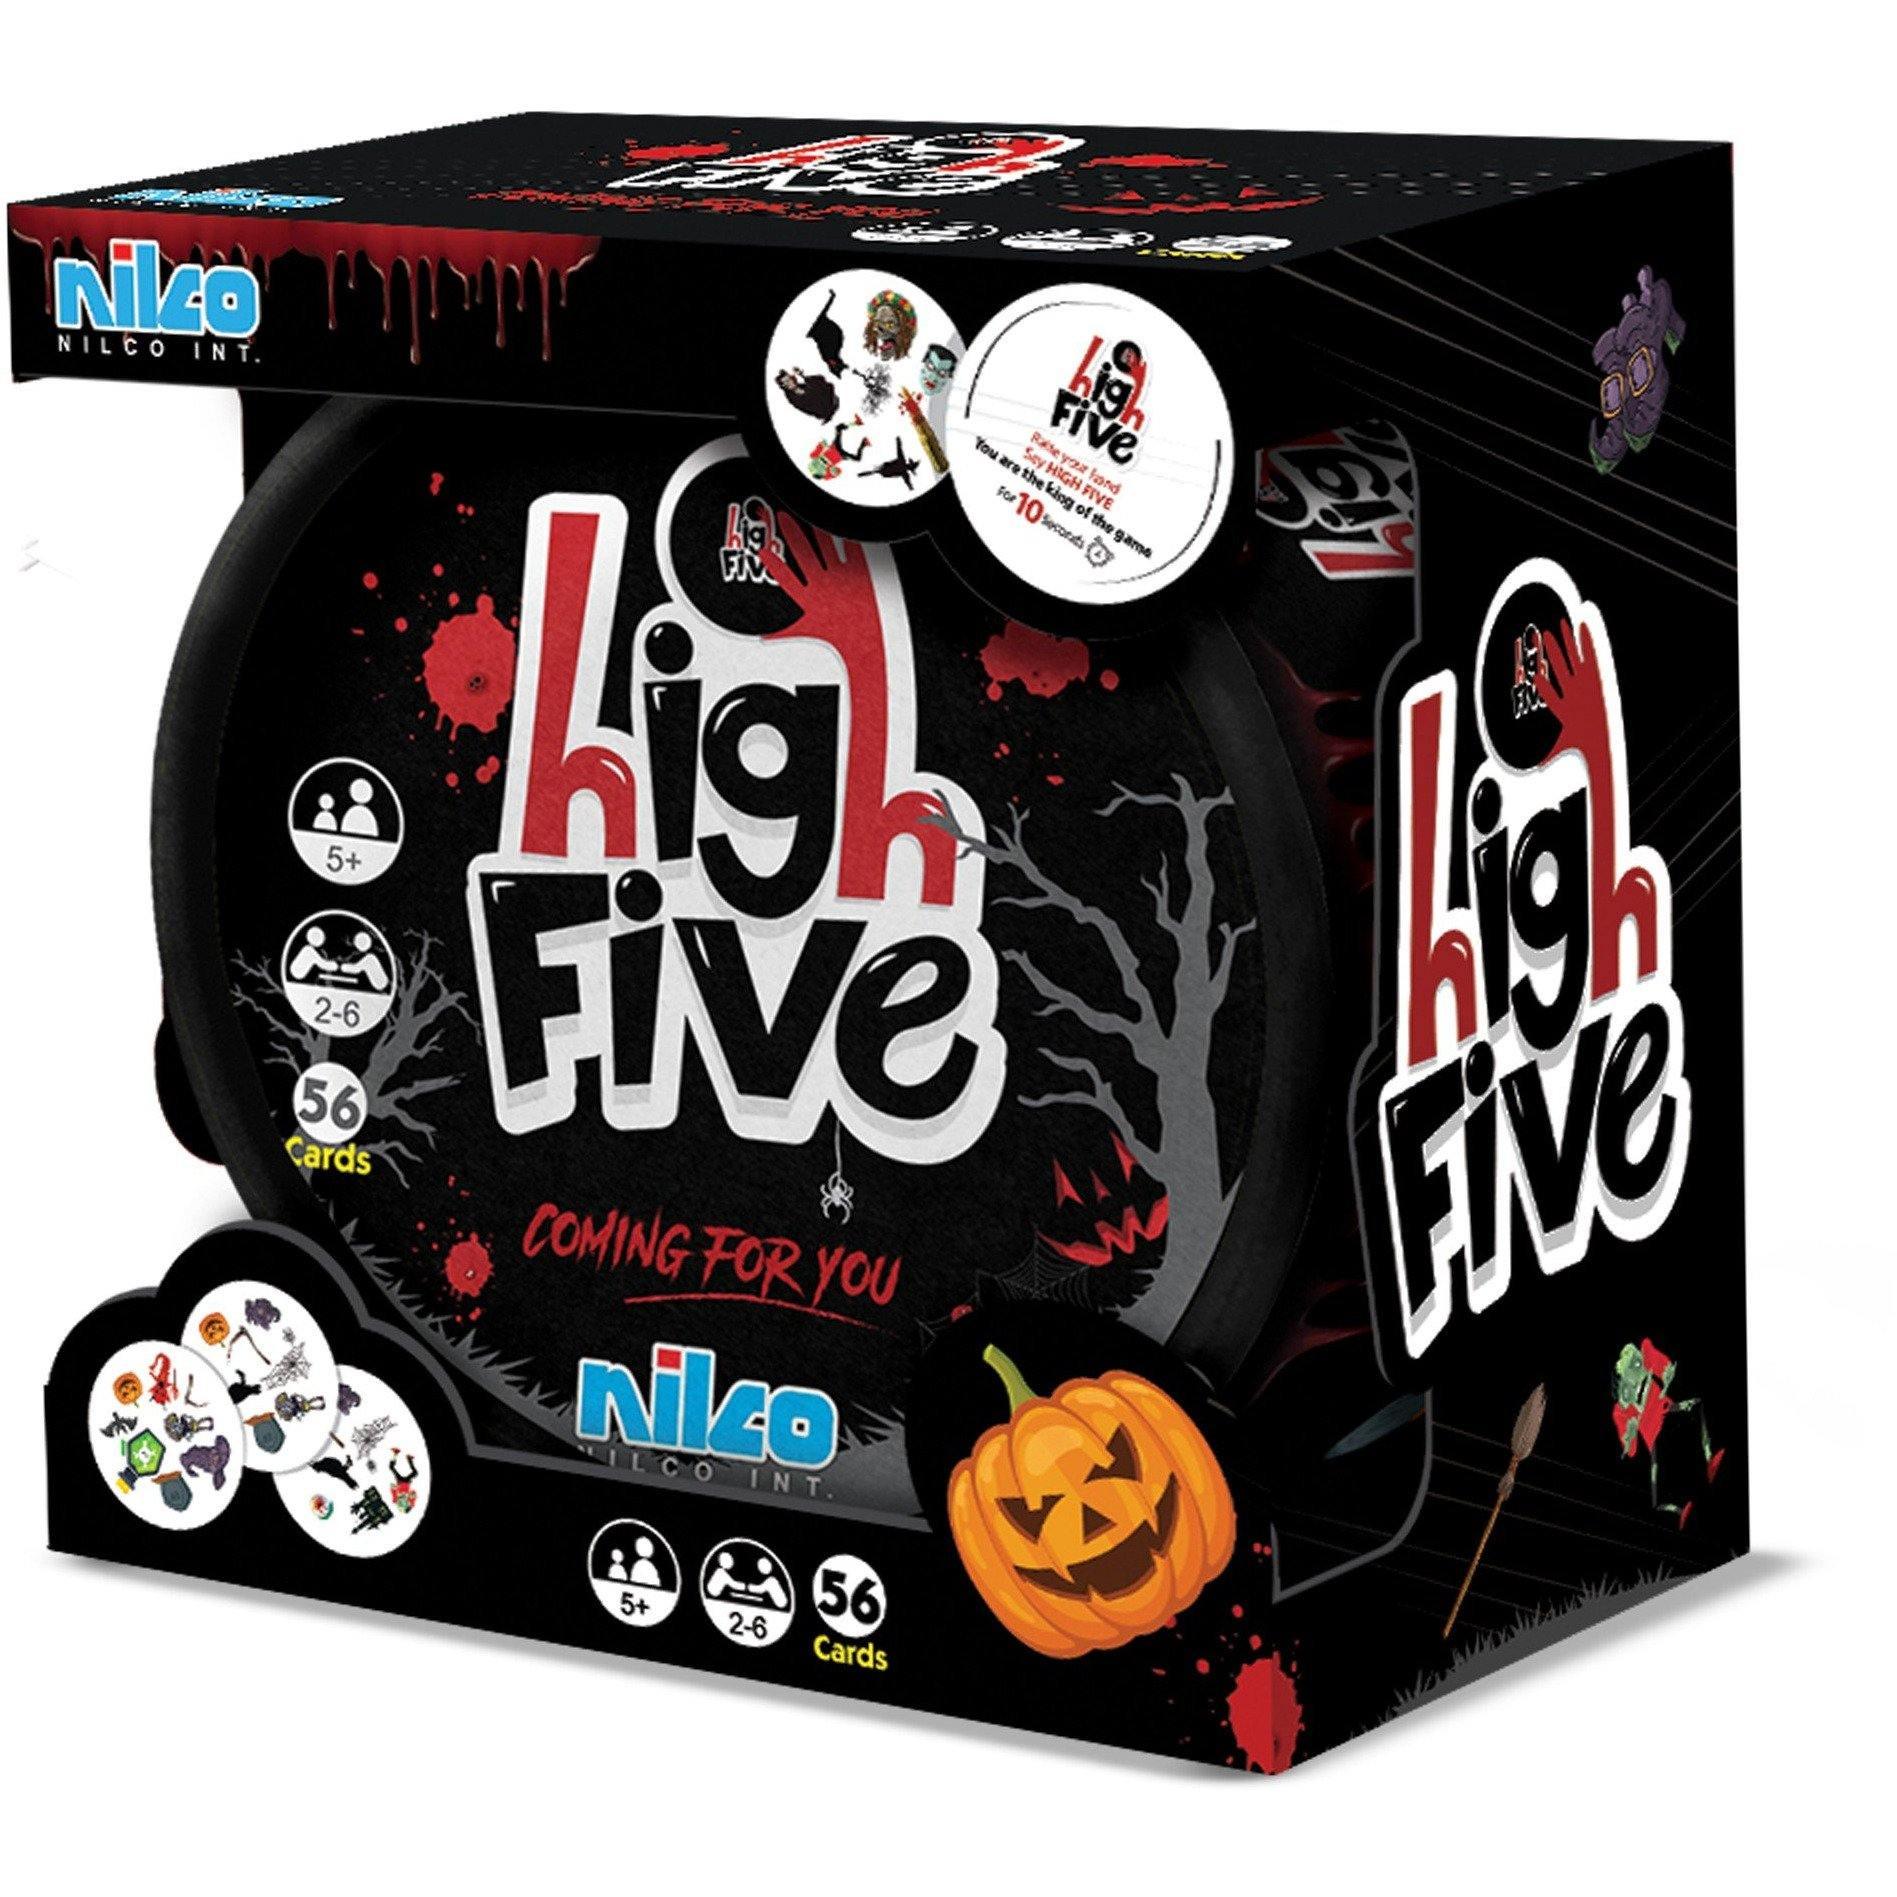 Nilco 9120 High Five Horror Edition Card Game - BumbleToys - 5-7 Years, Card & Board Games, Nilco, Puzzle & Board & Card Games, Unisex